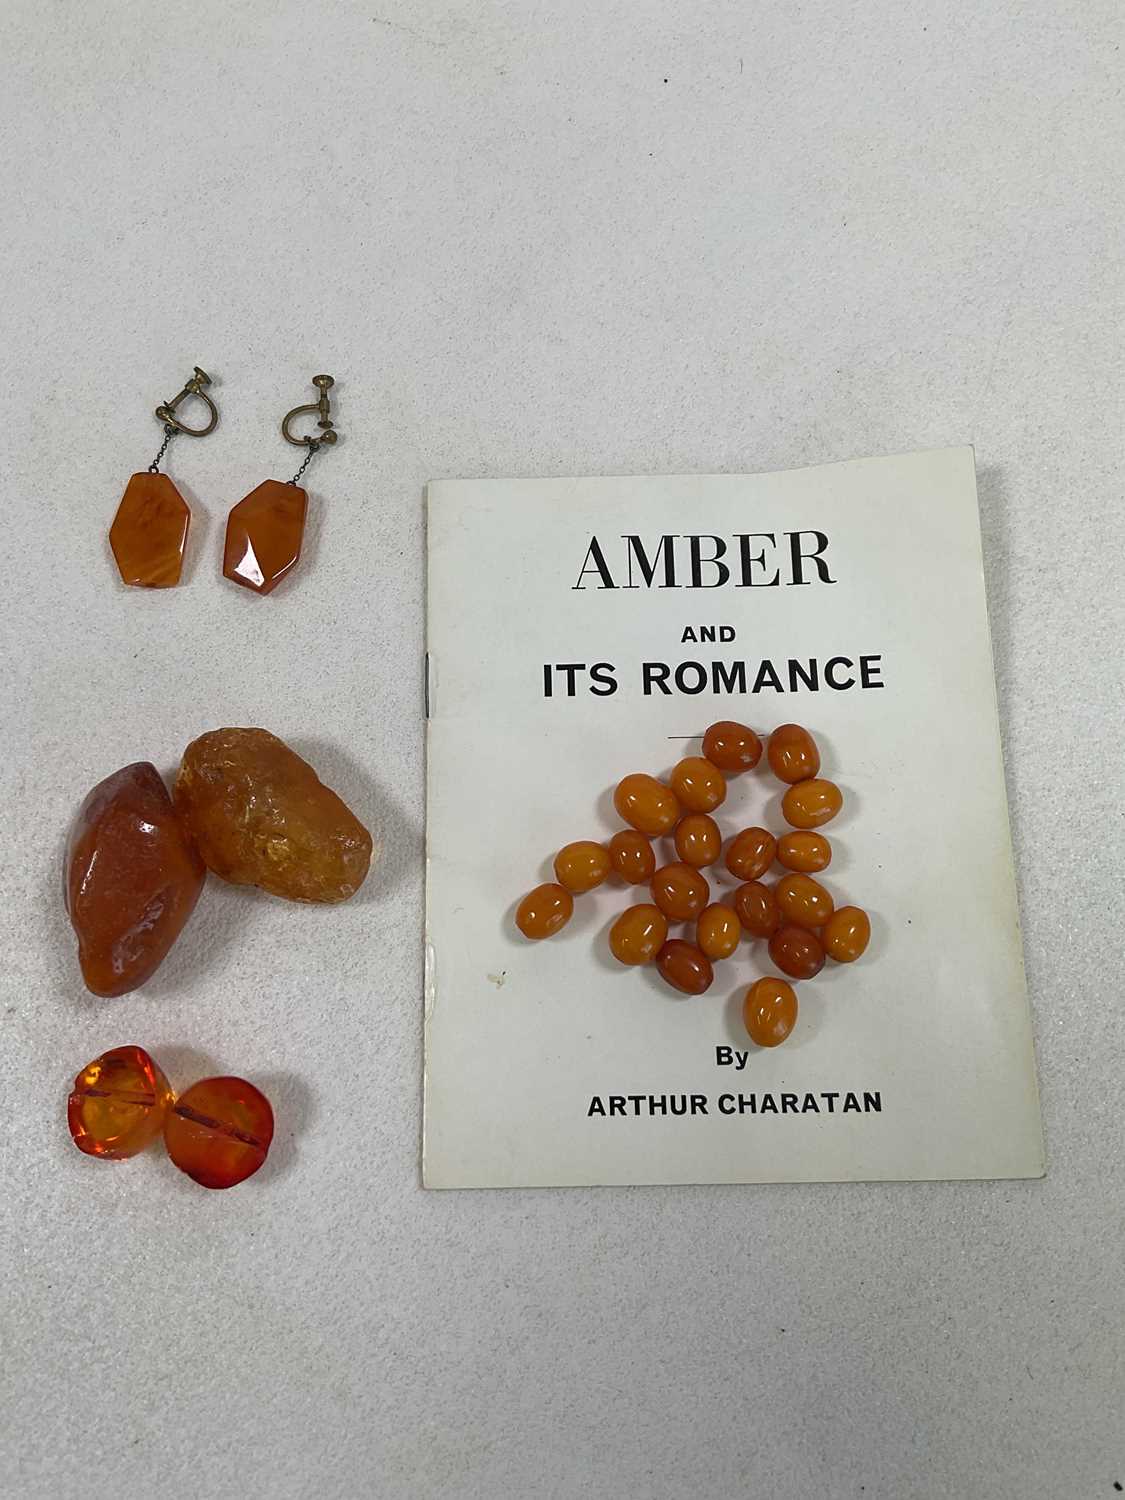 A group of loose amber beads, two large rough cut sections of amber, a split amber bead and a pair